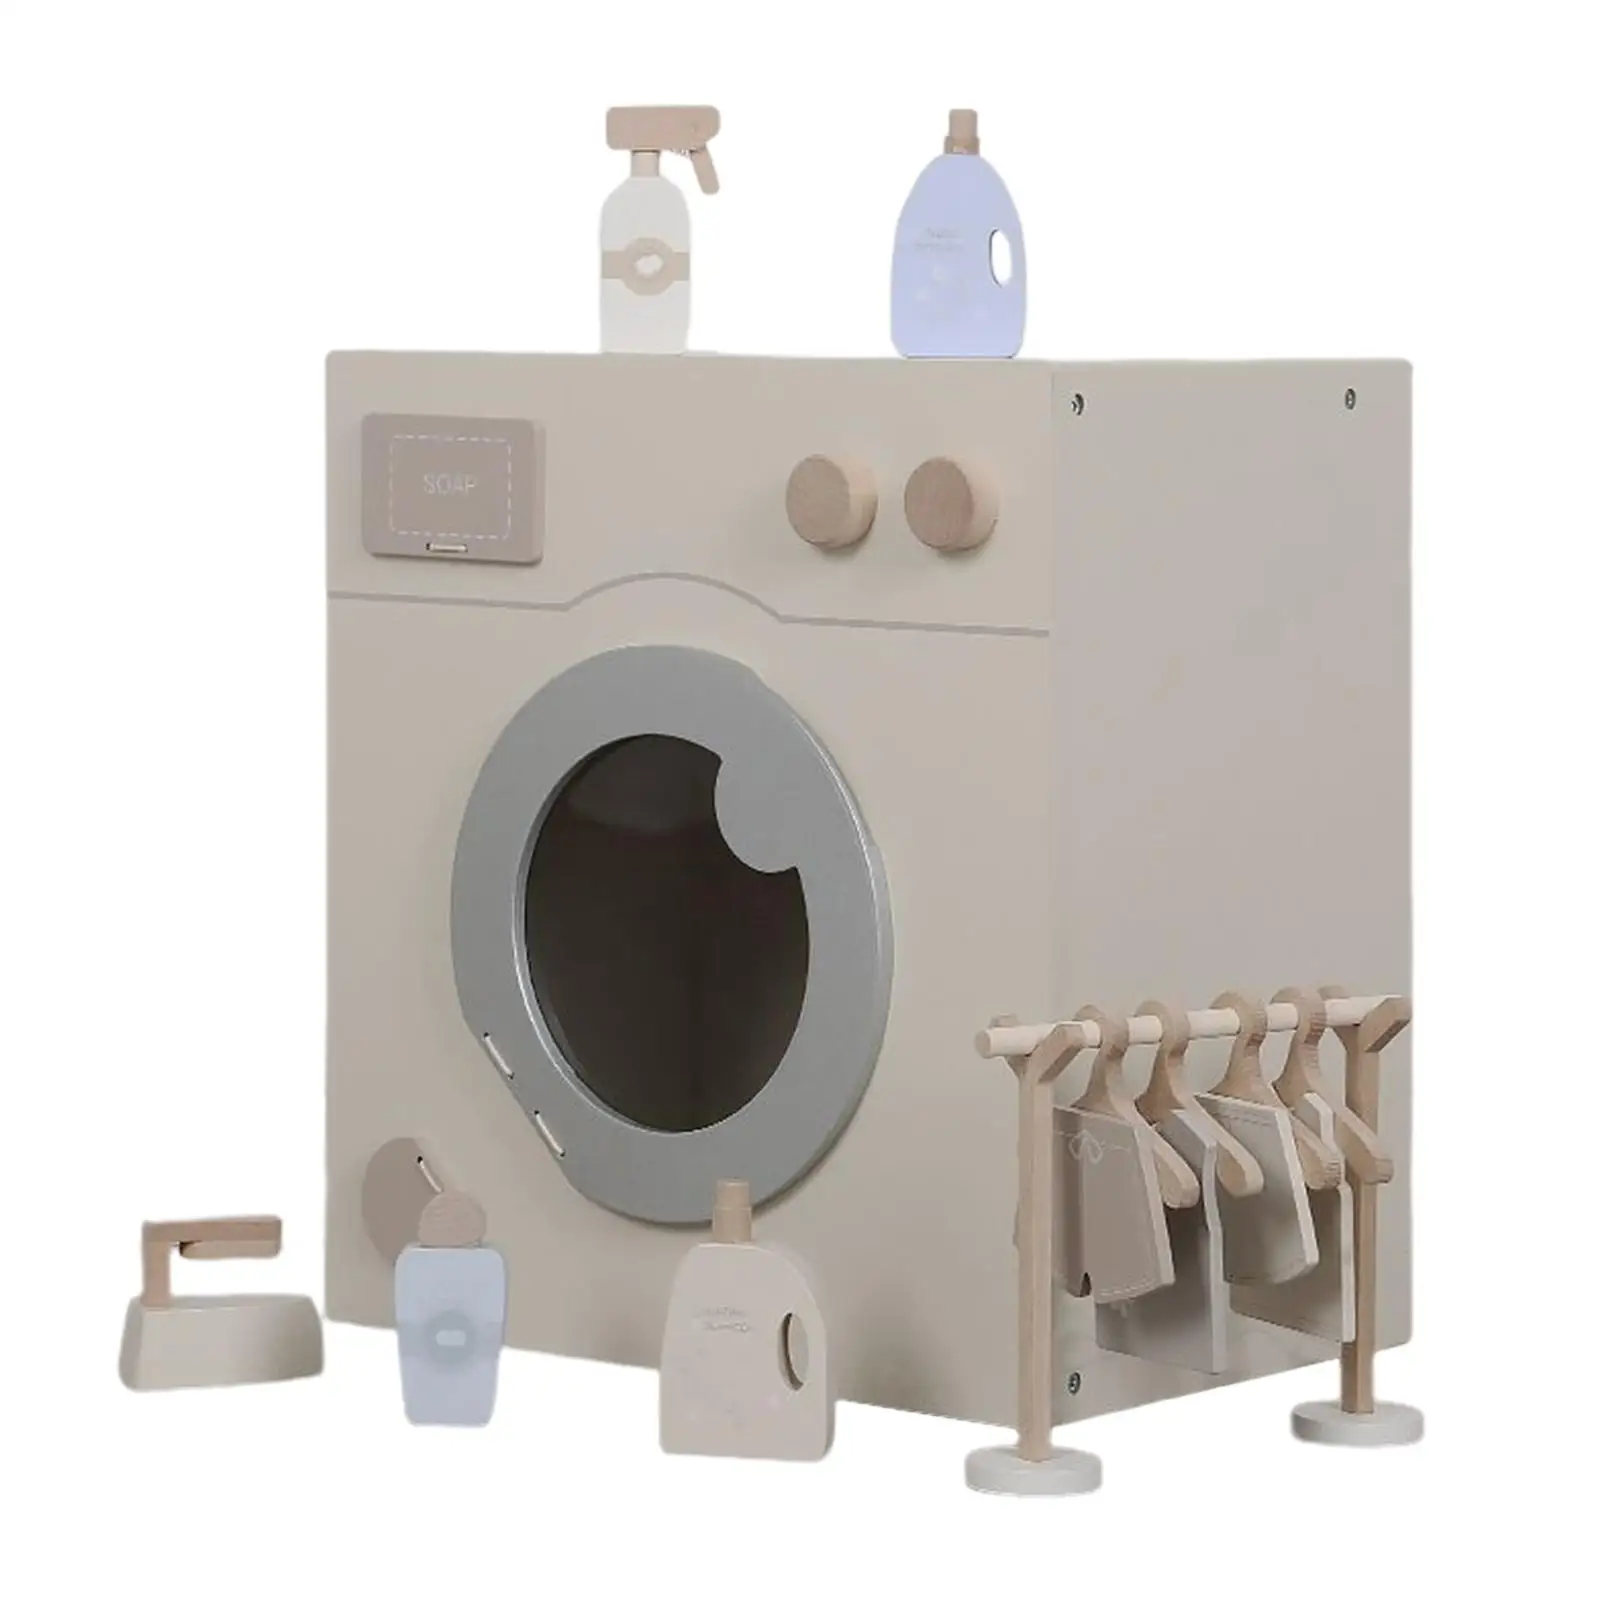 Wooden Washing Machine Set with Accessories Doll House Furniture Interactive Toy